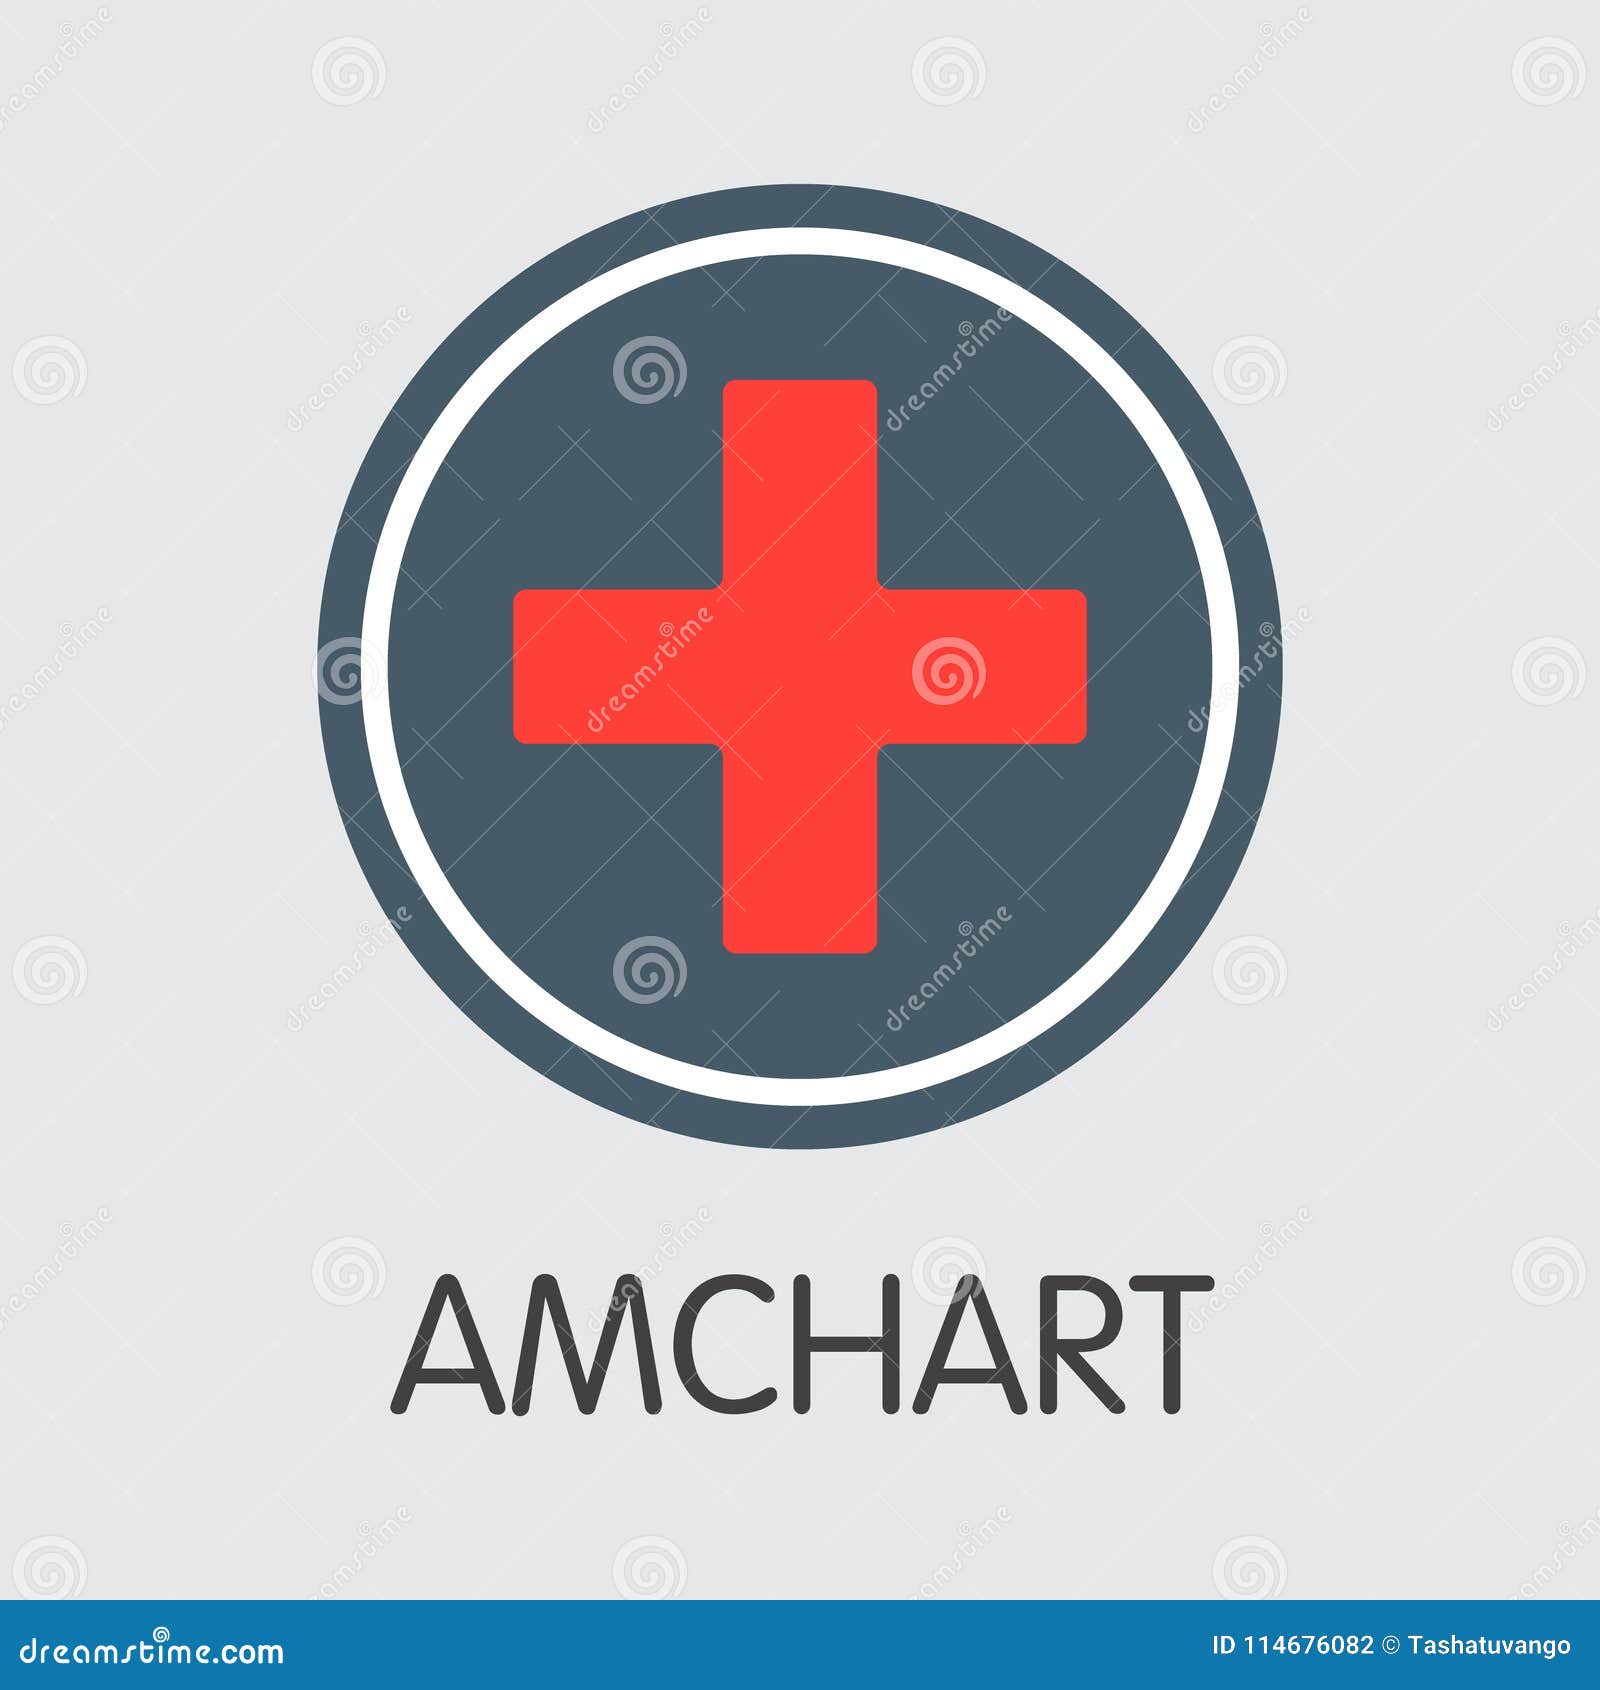 Amchart Cryptographic Currency. Vector AMC Coin Pictogram ...